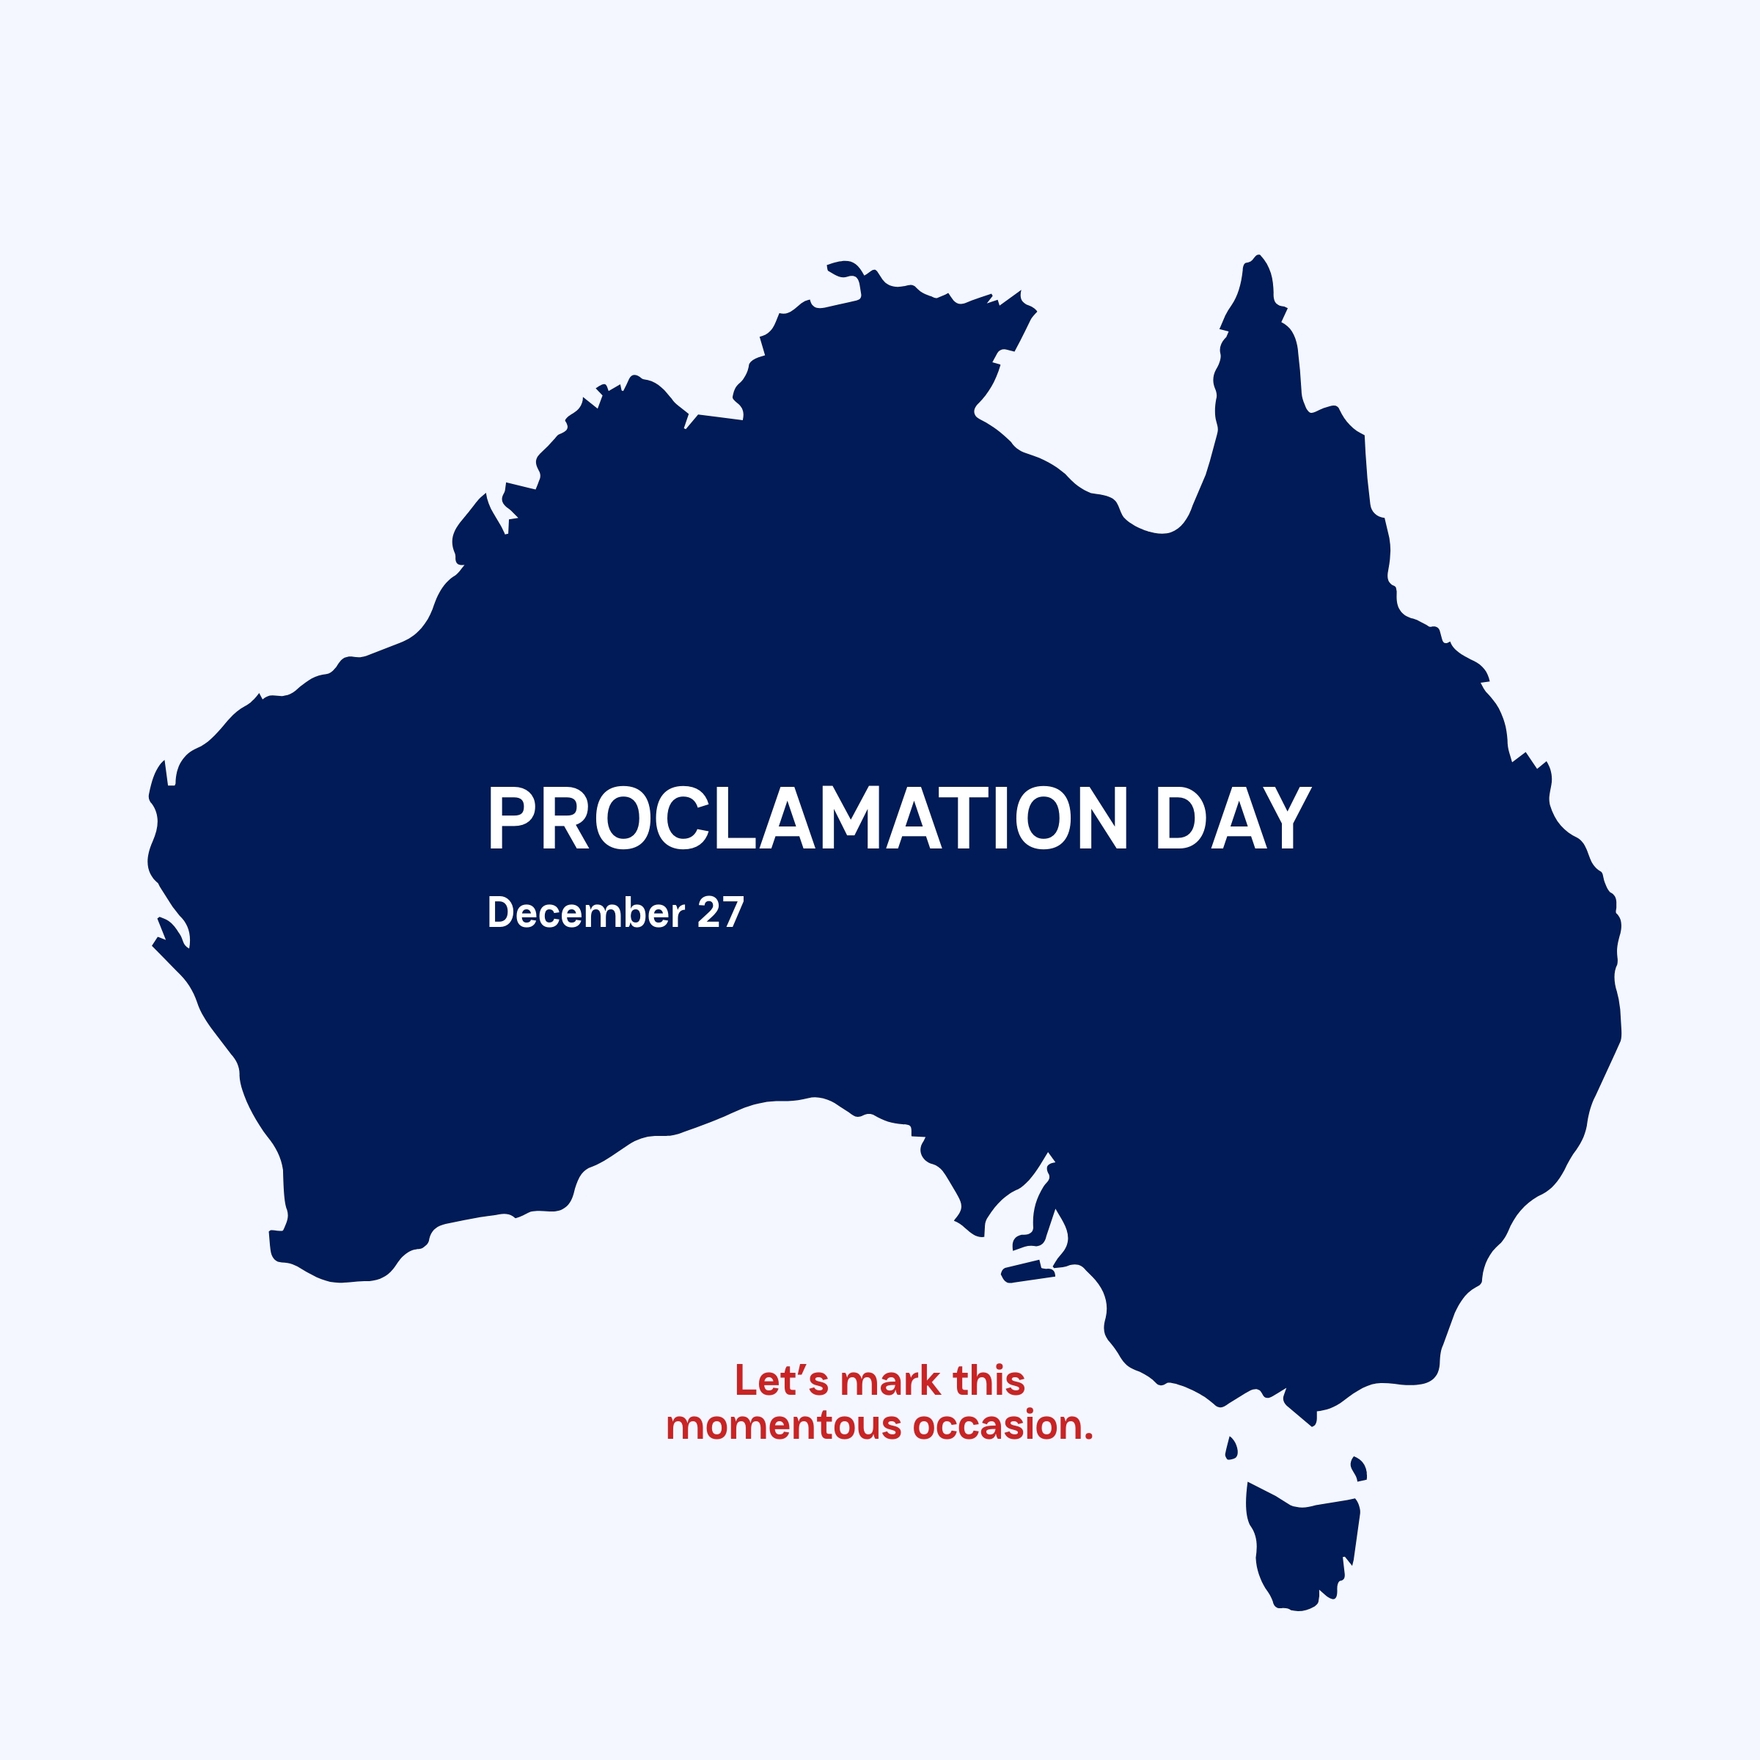 Proclamation Day WhatsApp Post in Illustrator, PSD, EPS, SVG, PNG, JPEG